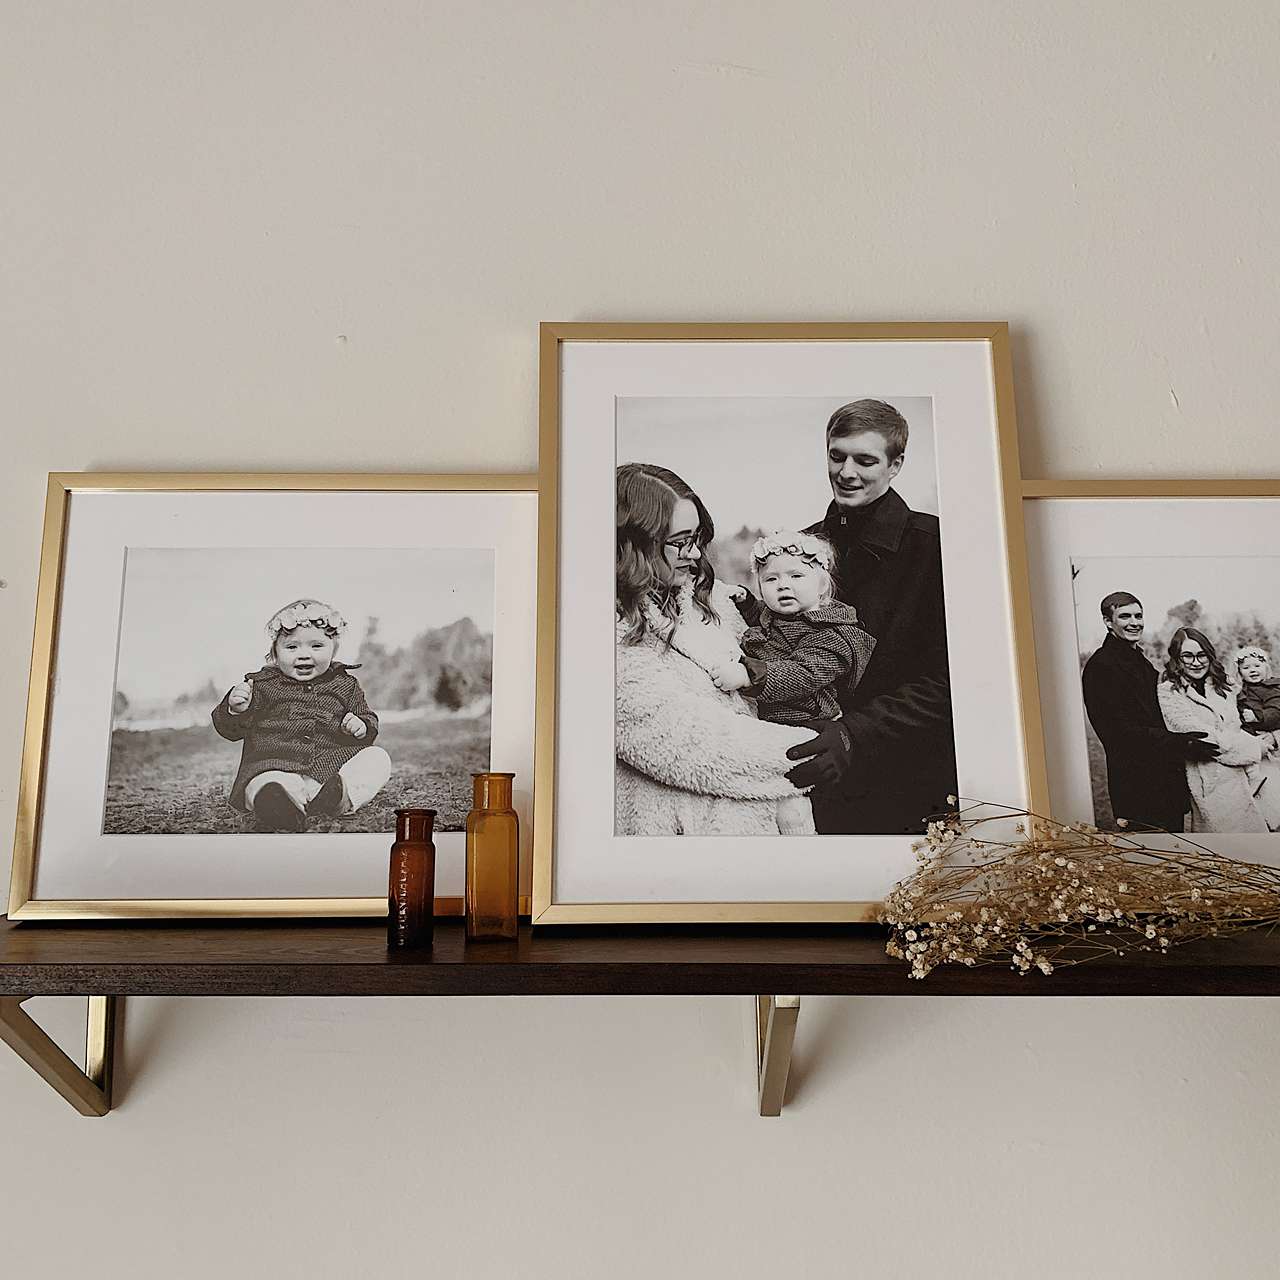 White or Ivory Mounts Details about   Black or White MODERN Photo Picture Frames with Black 